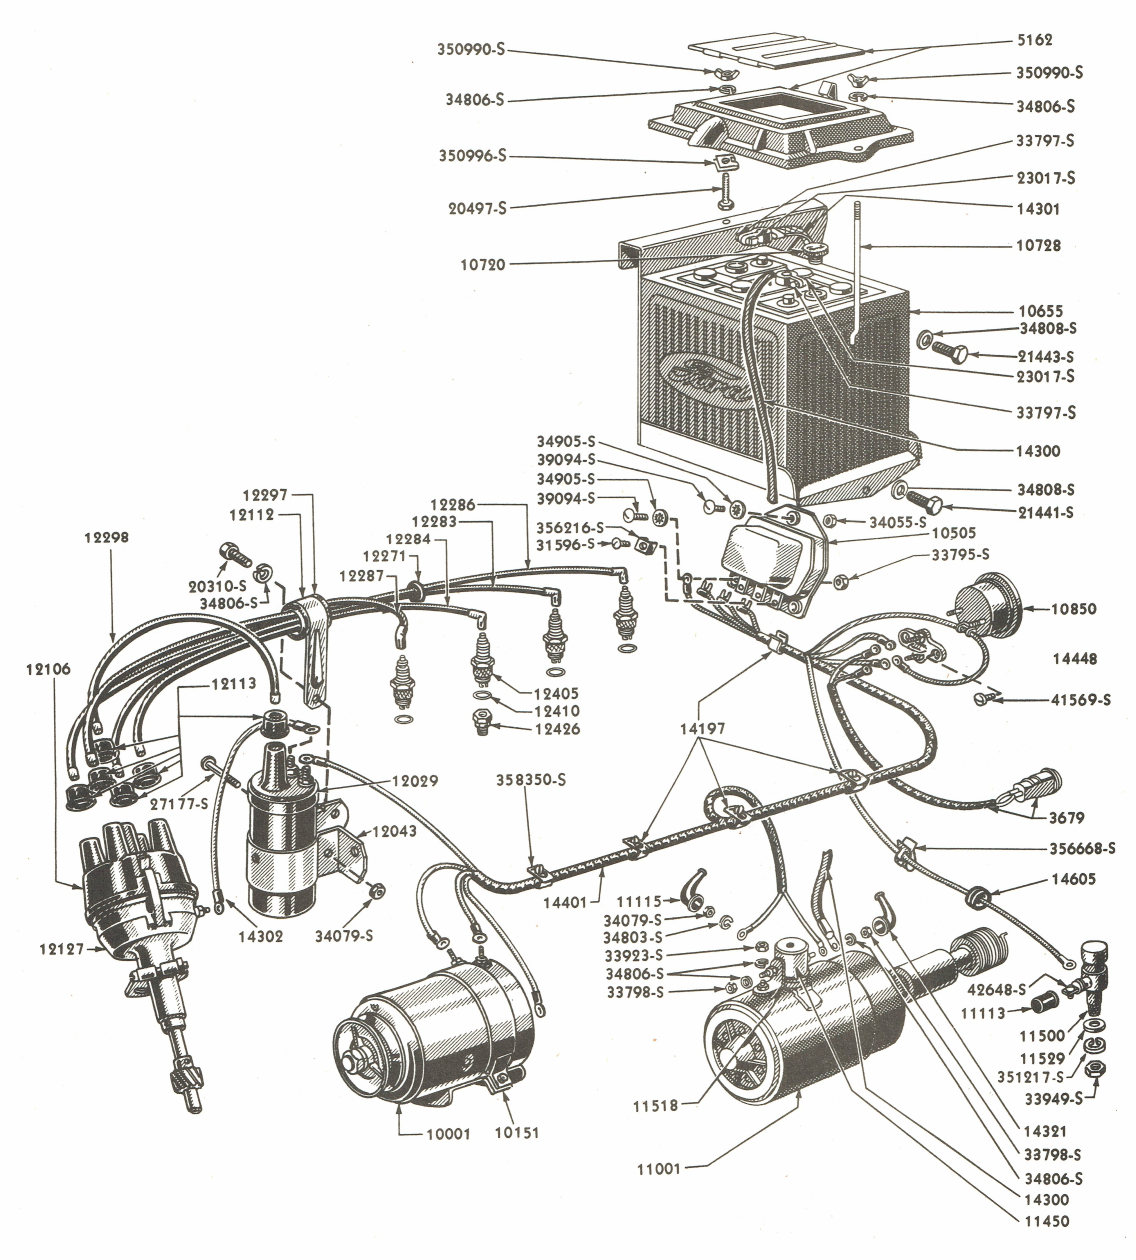 Diagram] Ford Tractor Electrical Wiring Diagram Full Version